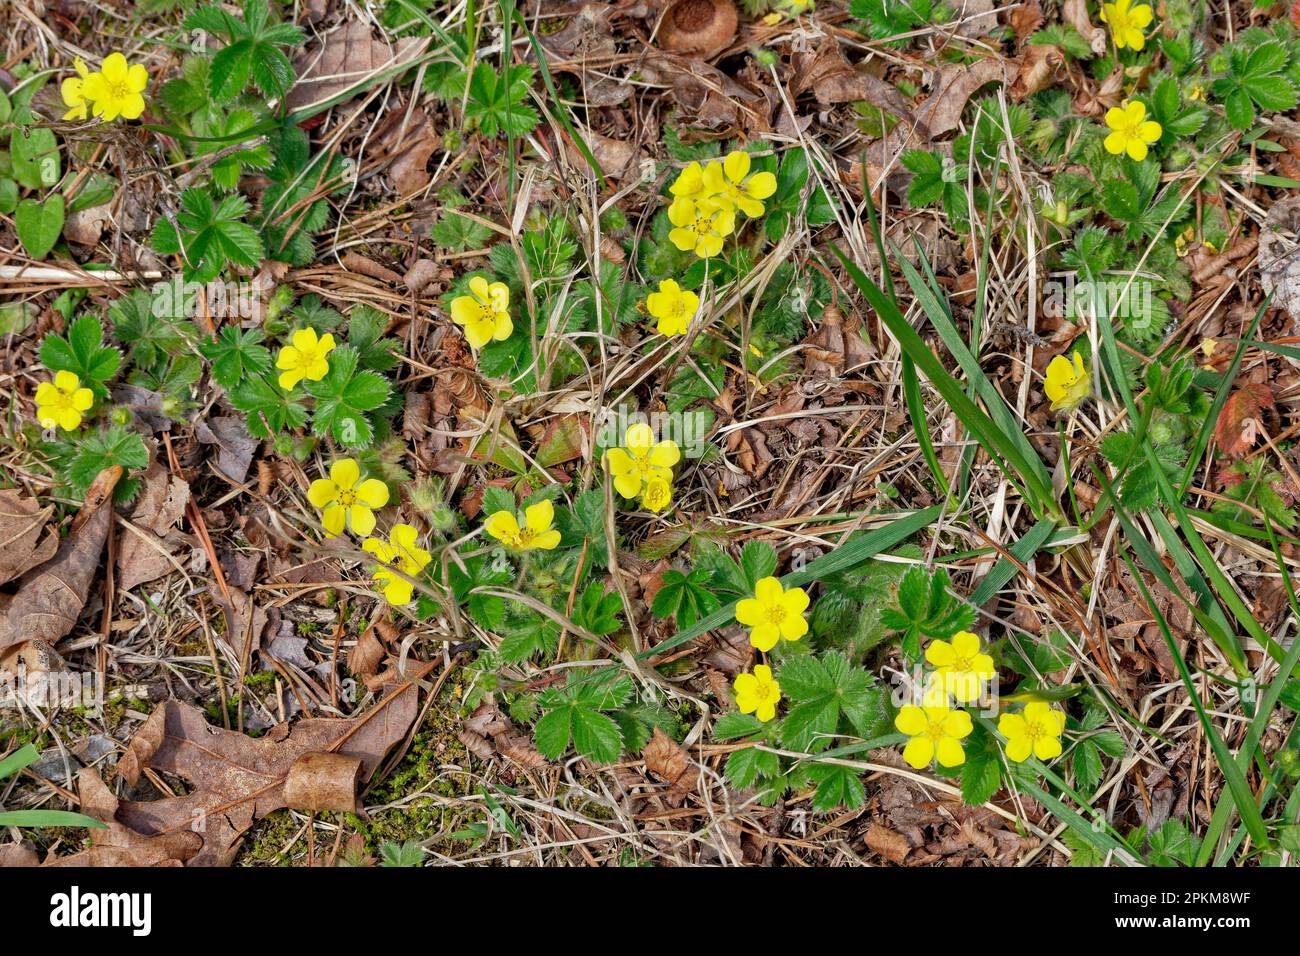 A common cinquefoil plant with little yellow flowers growing in the woodland spreading in an open area on the ground top view looking down closeup on Stock Photo